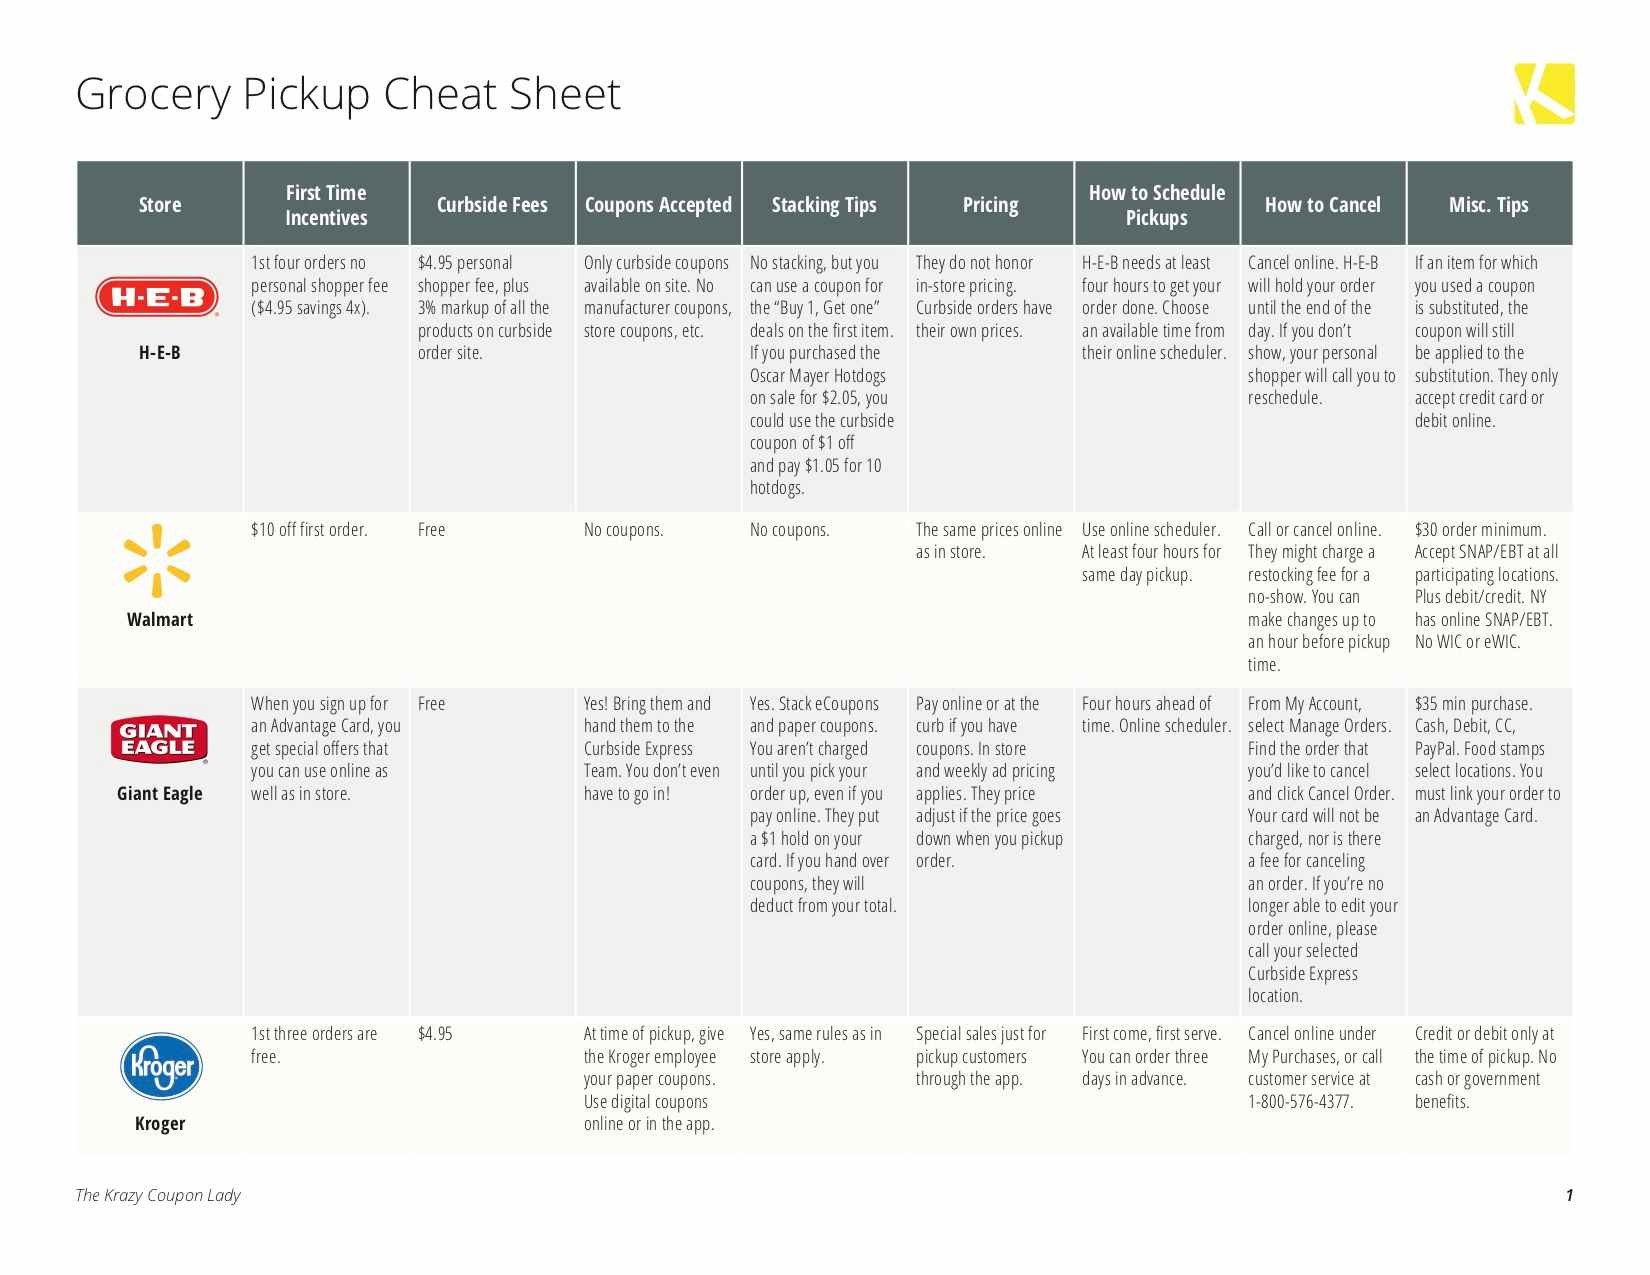 Grocery Store Grocery Pickup Policies and Information Chart